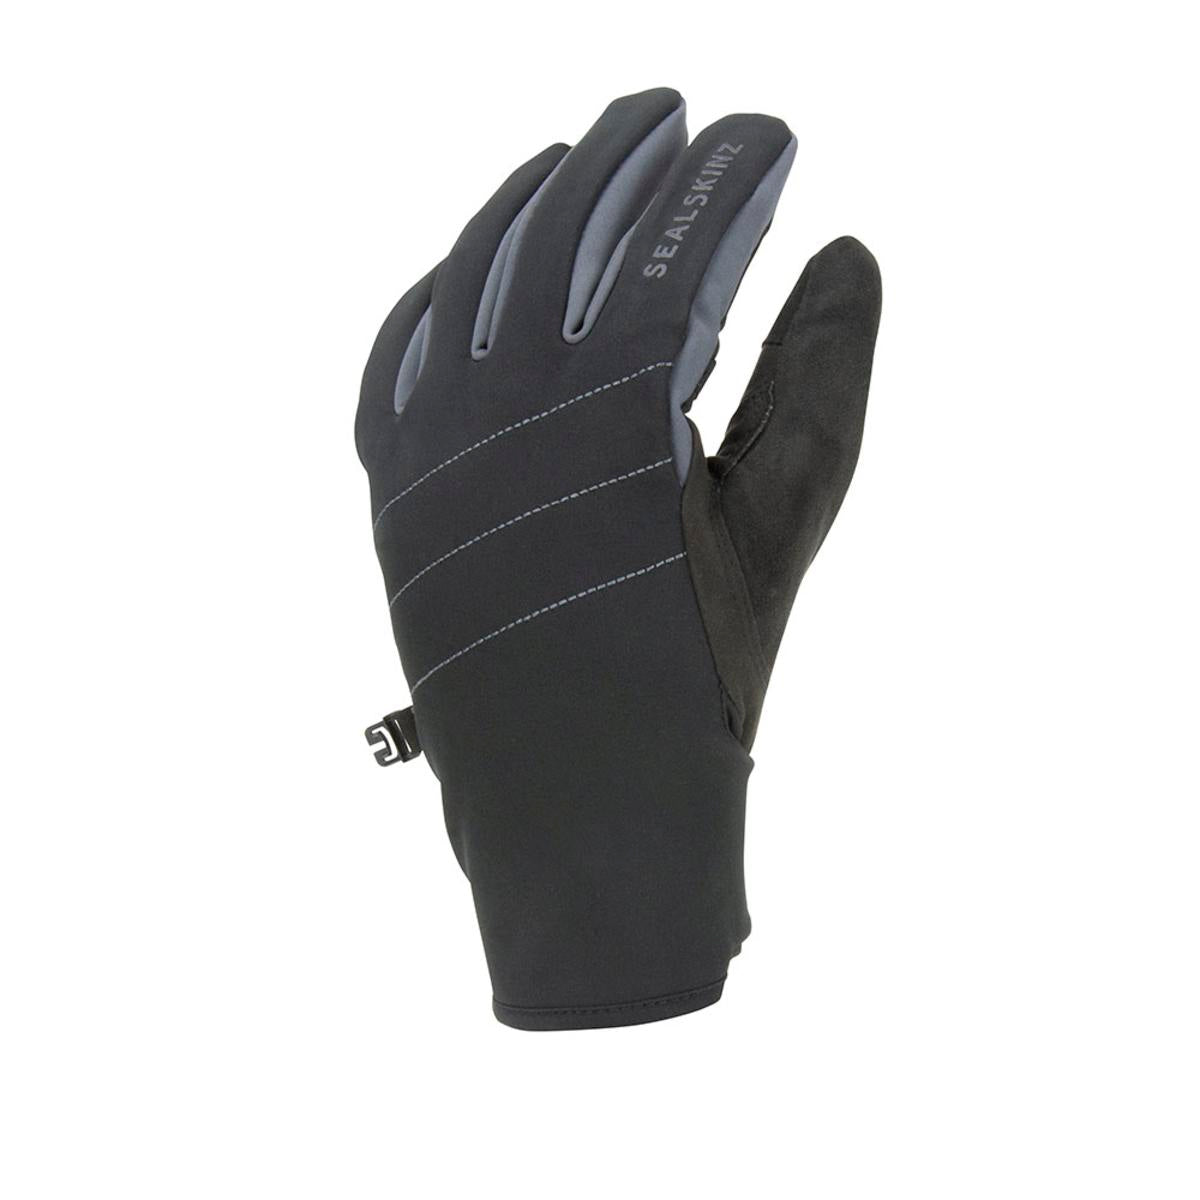 Sealskinz Waterproof All Weather Gloves with Fusion Control